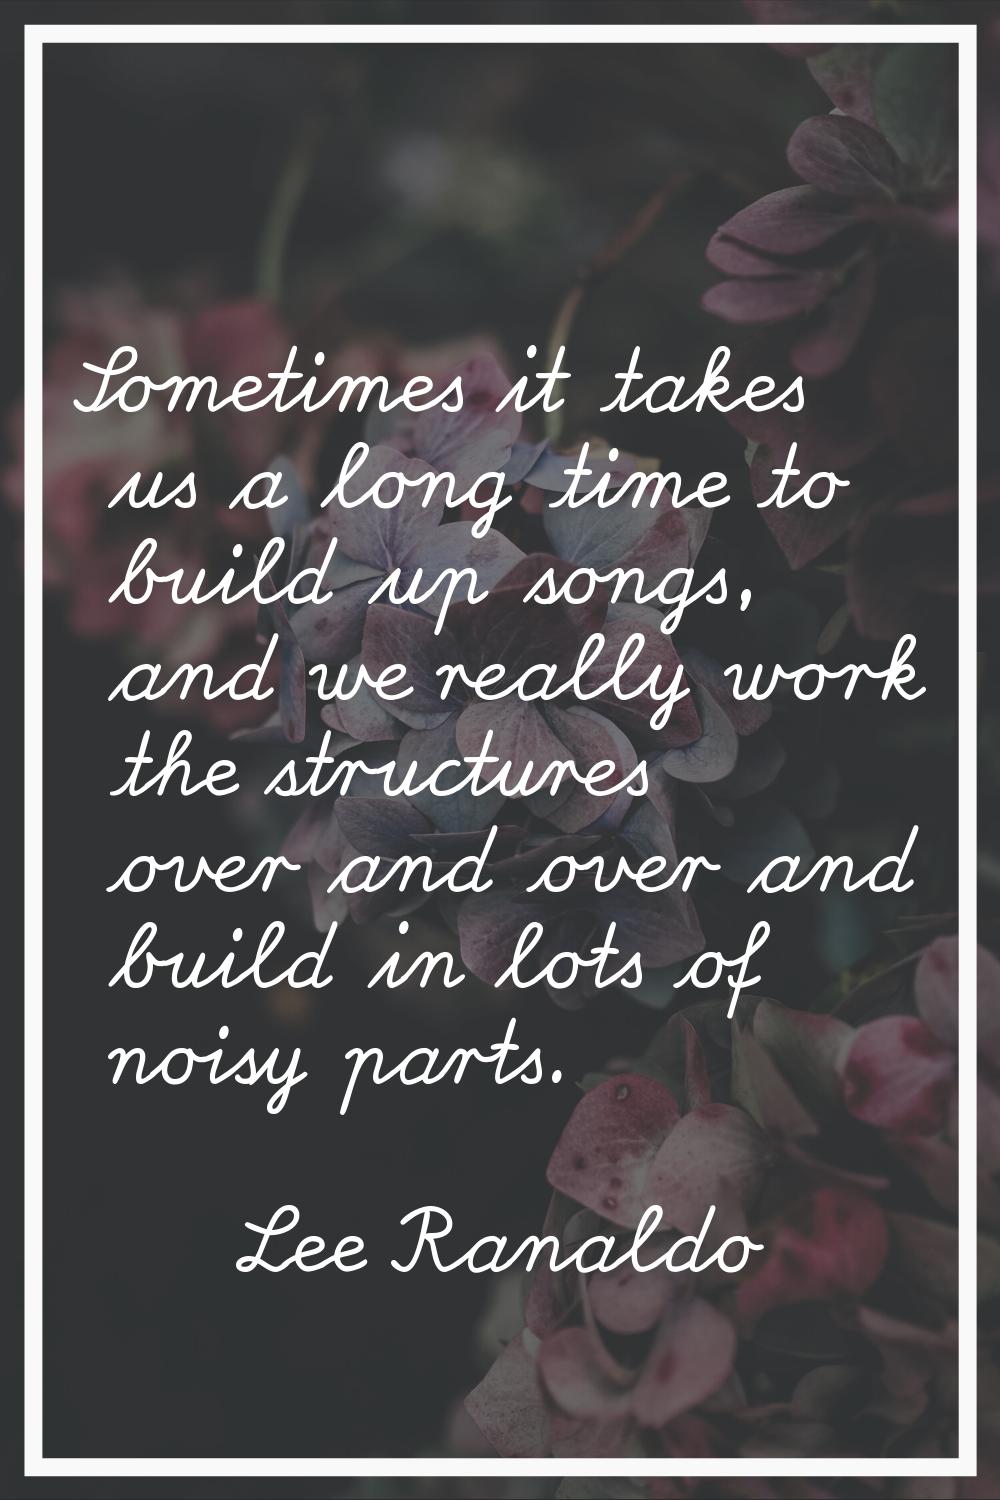 Sometimes it takes us a long time to build up songs, and we really work the structures over and ove